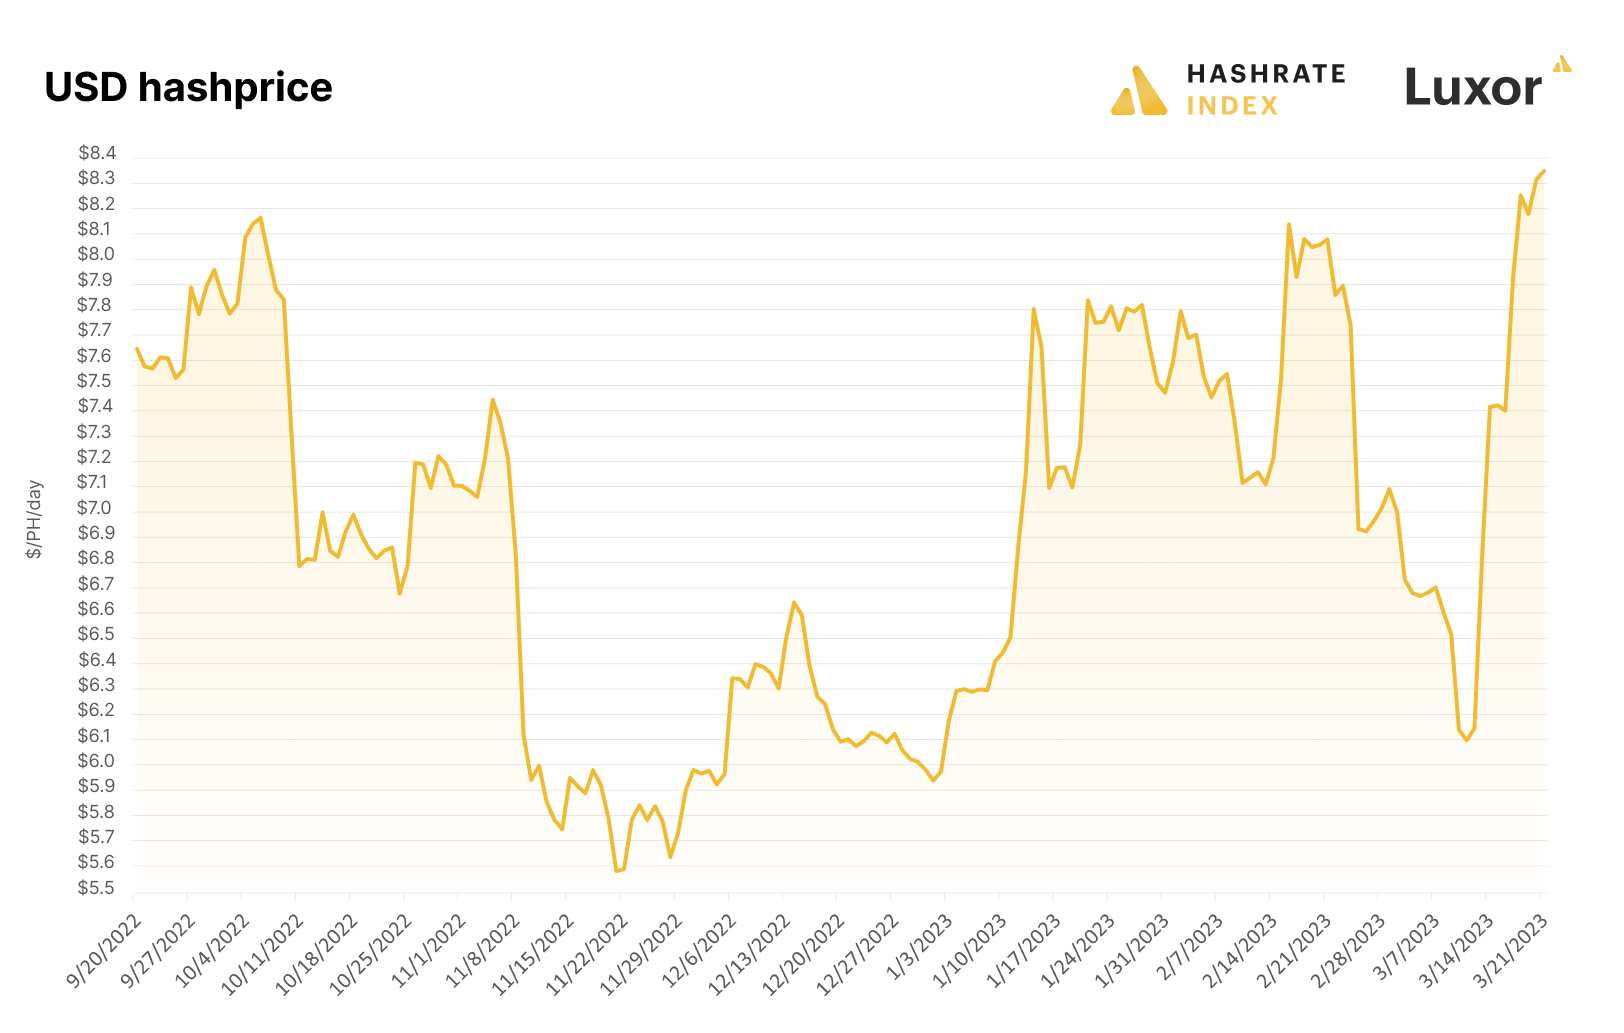 USD hashprice (September 20, 2022 - March 21, 2022) | Source: Hashrate Index